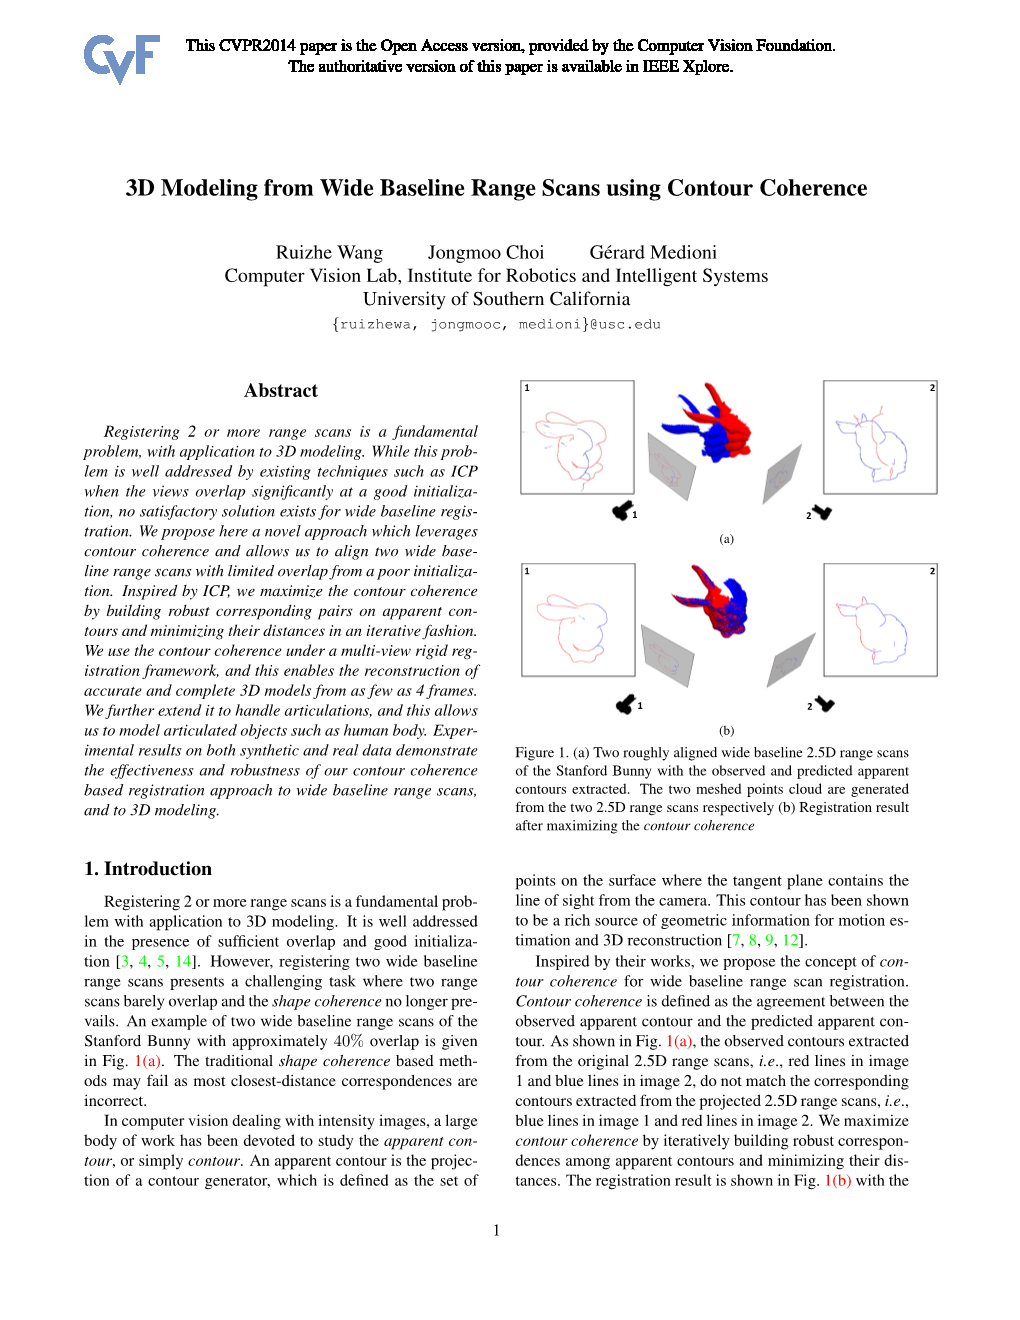 3D Modeling from Wide Baseline Range Scans Using Contour Coherence